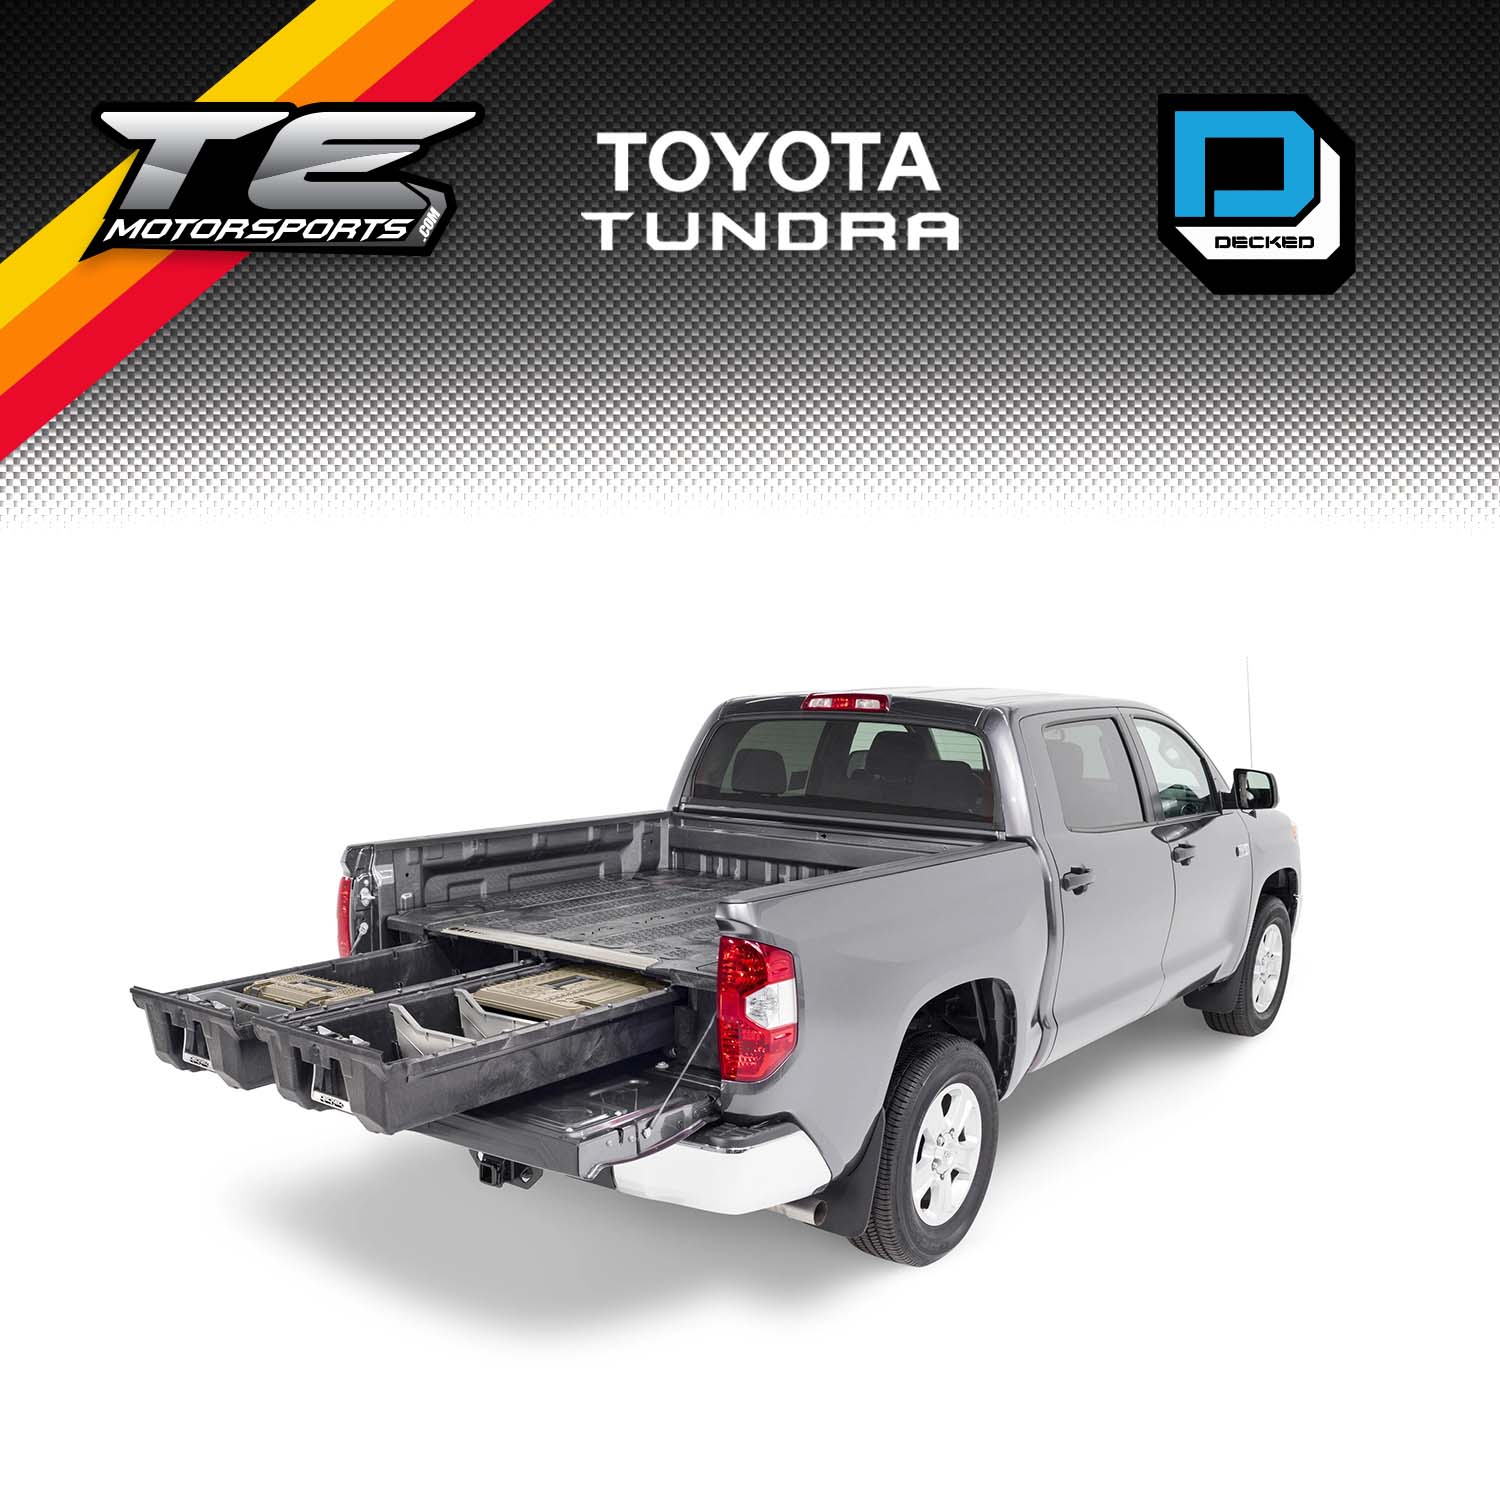 Decked Drawer System Toyota Tundra